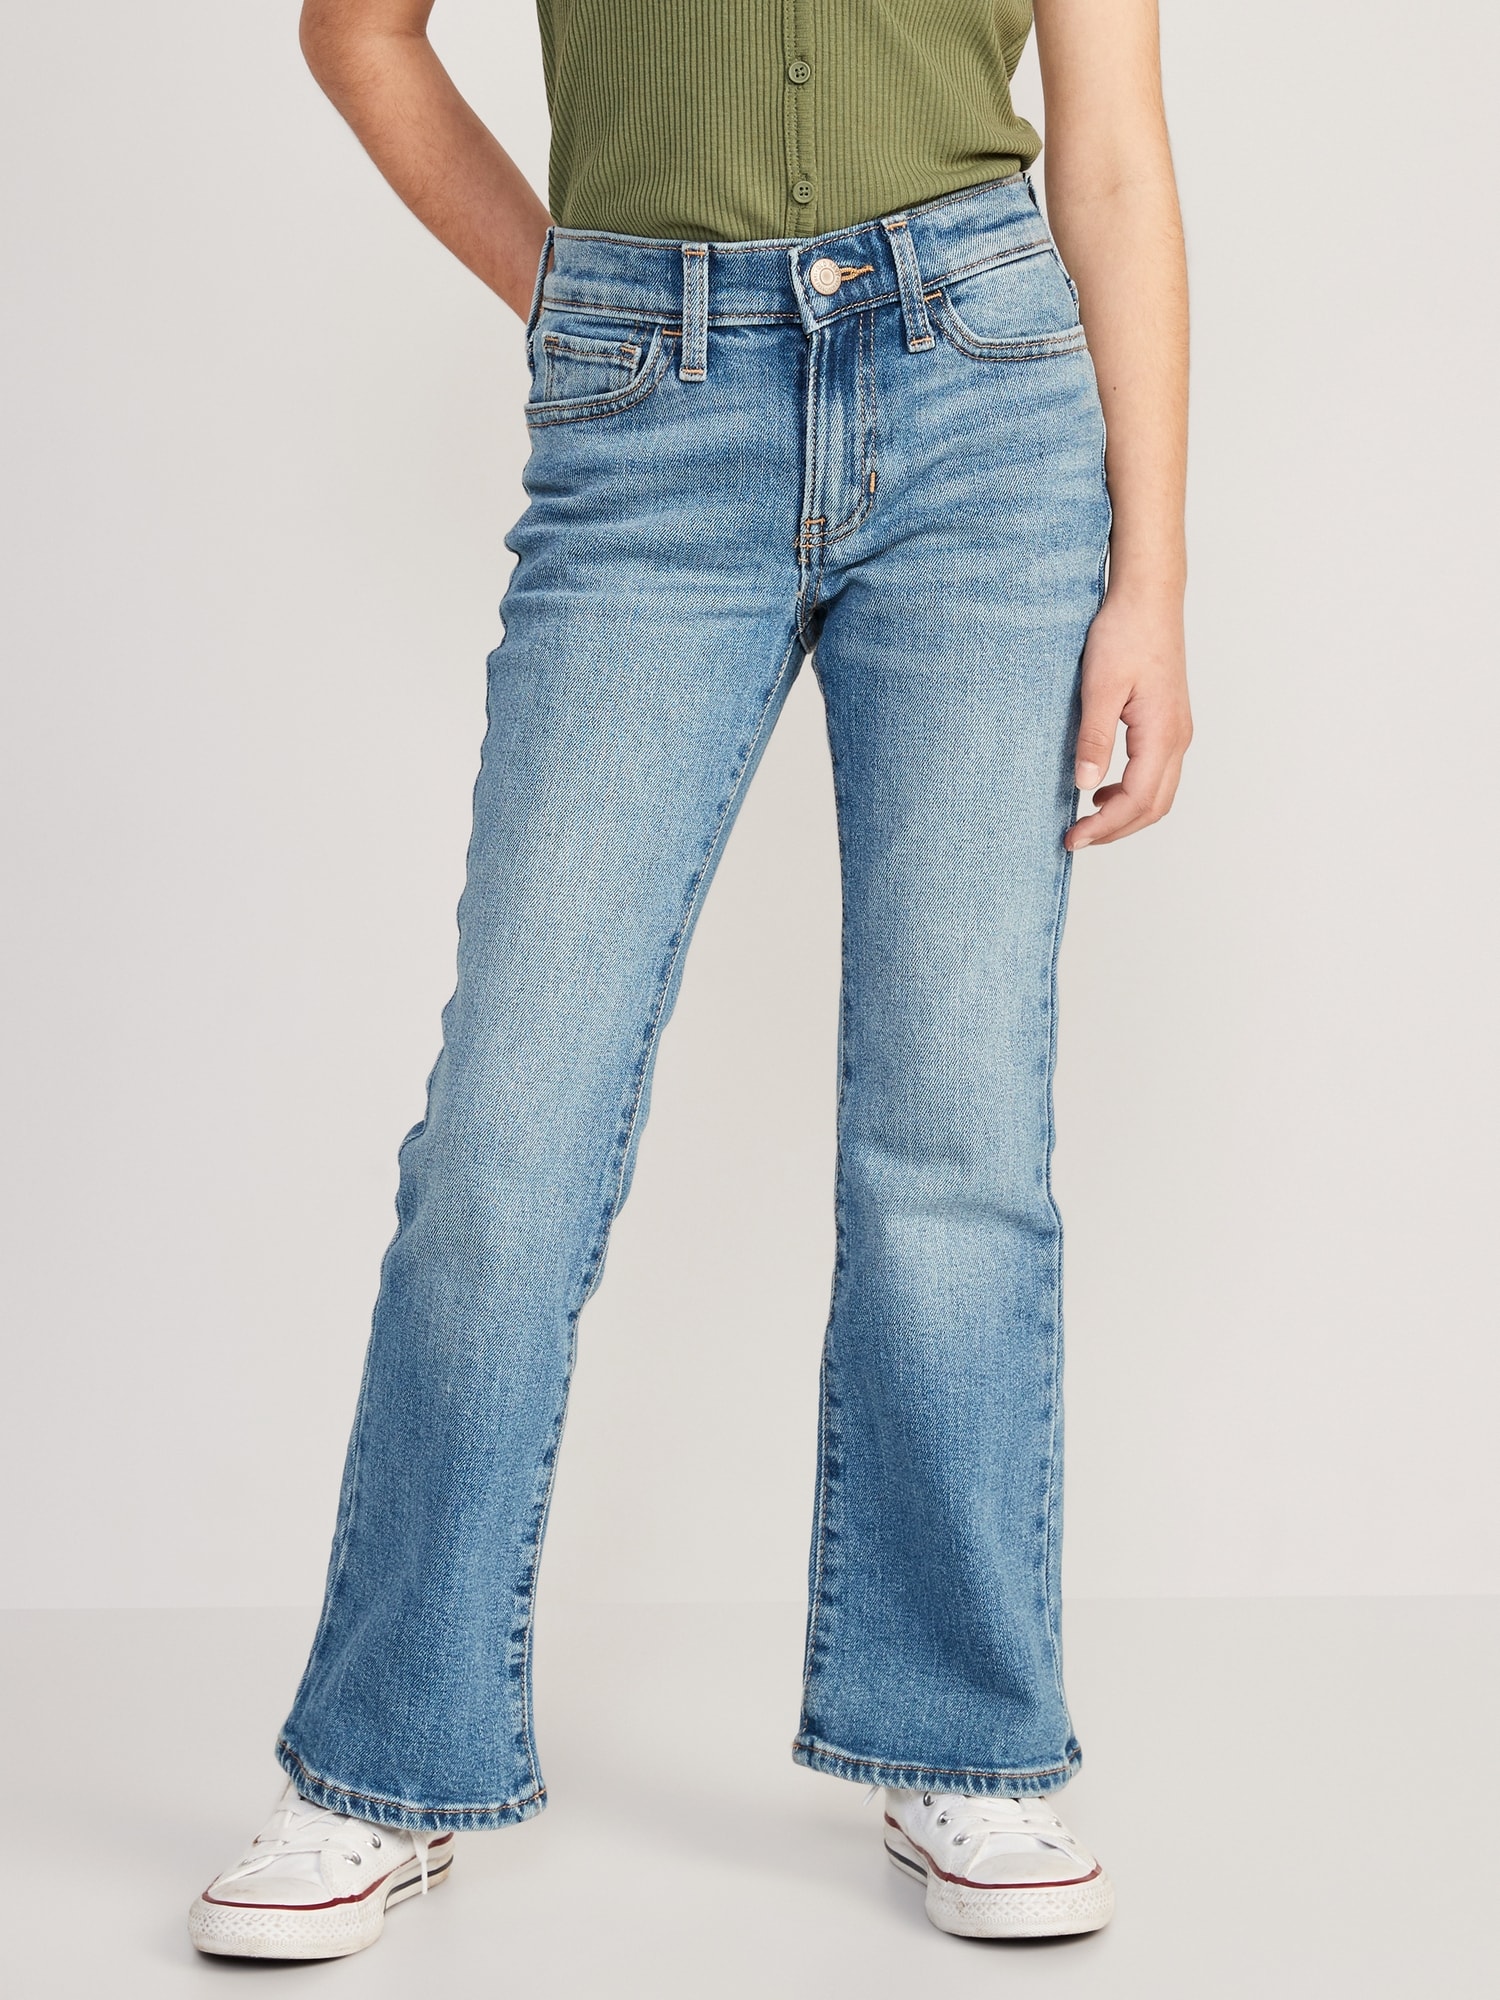 High-Waisted Flare Jeans for Girls, Old Navy